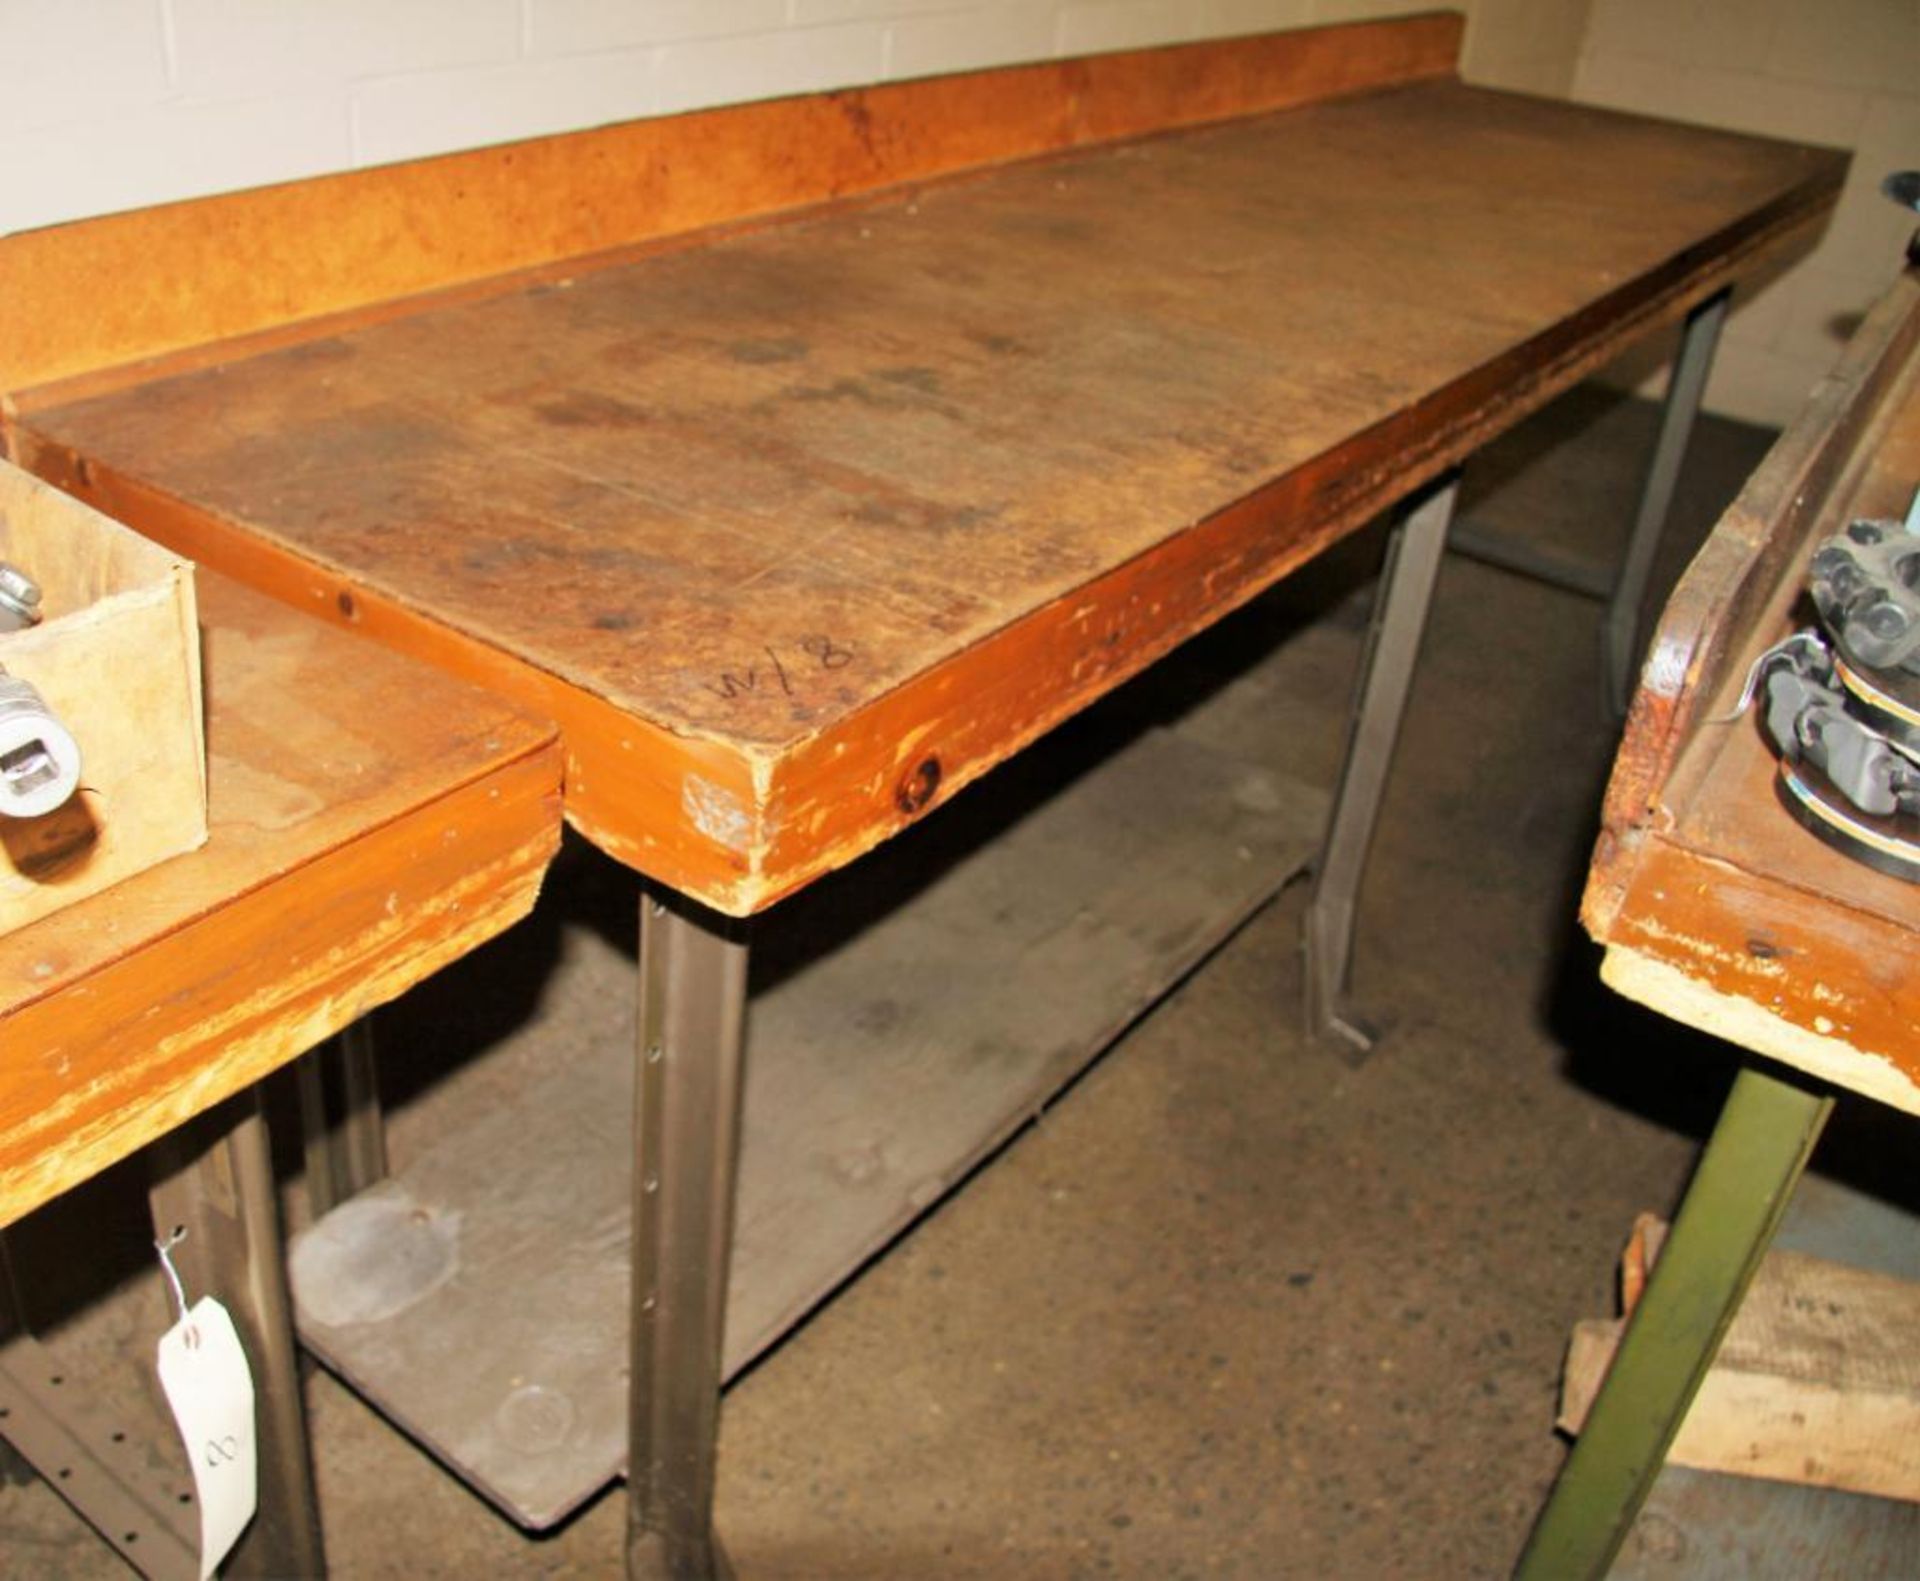 (3) 2' X 8' Woodtop Work Benches With Steel Legs ( No Contents) - Image 2 of 3